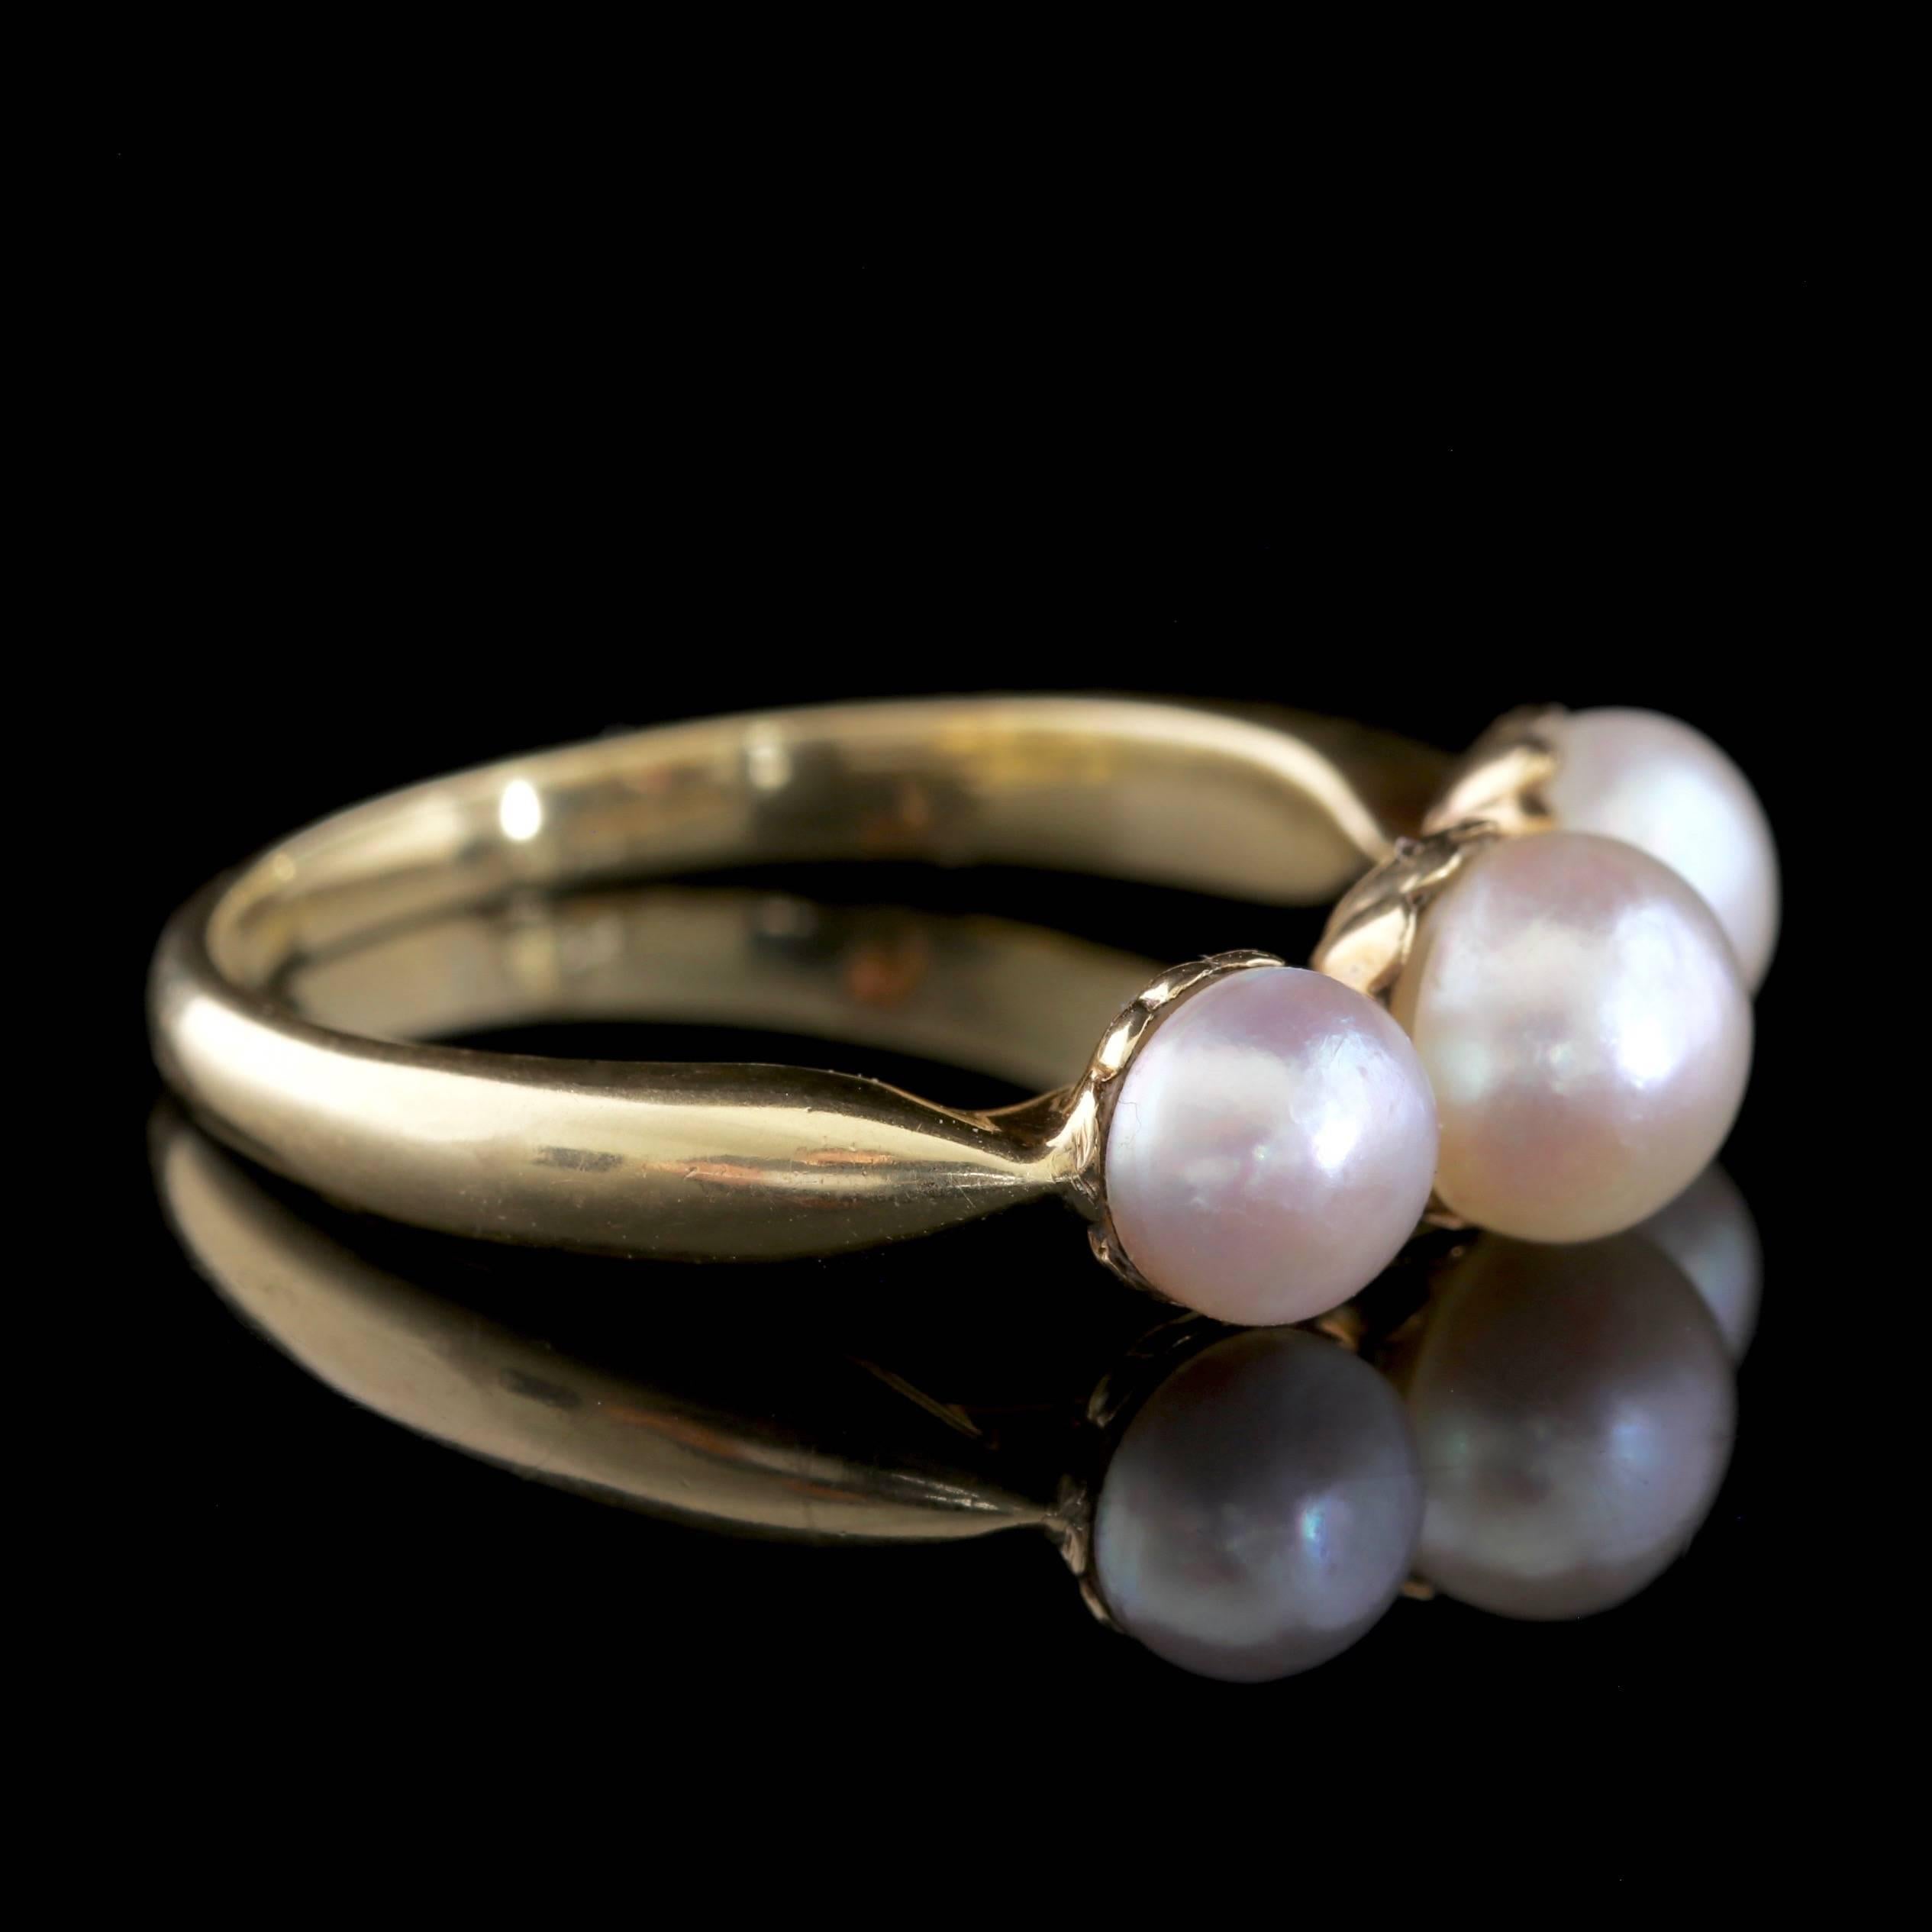 Women's Antique French Victorian Pearl Ring 18 Carat Gold, circa 1900